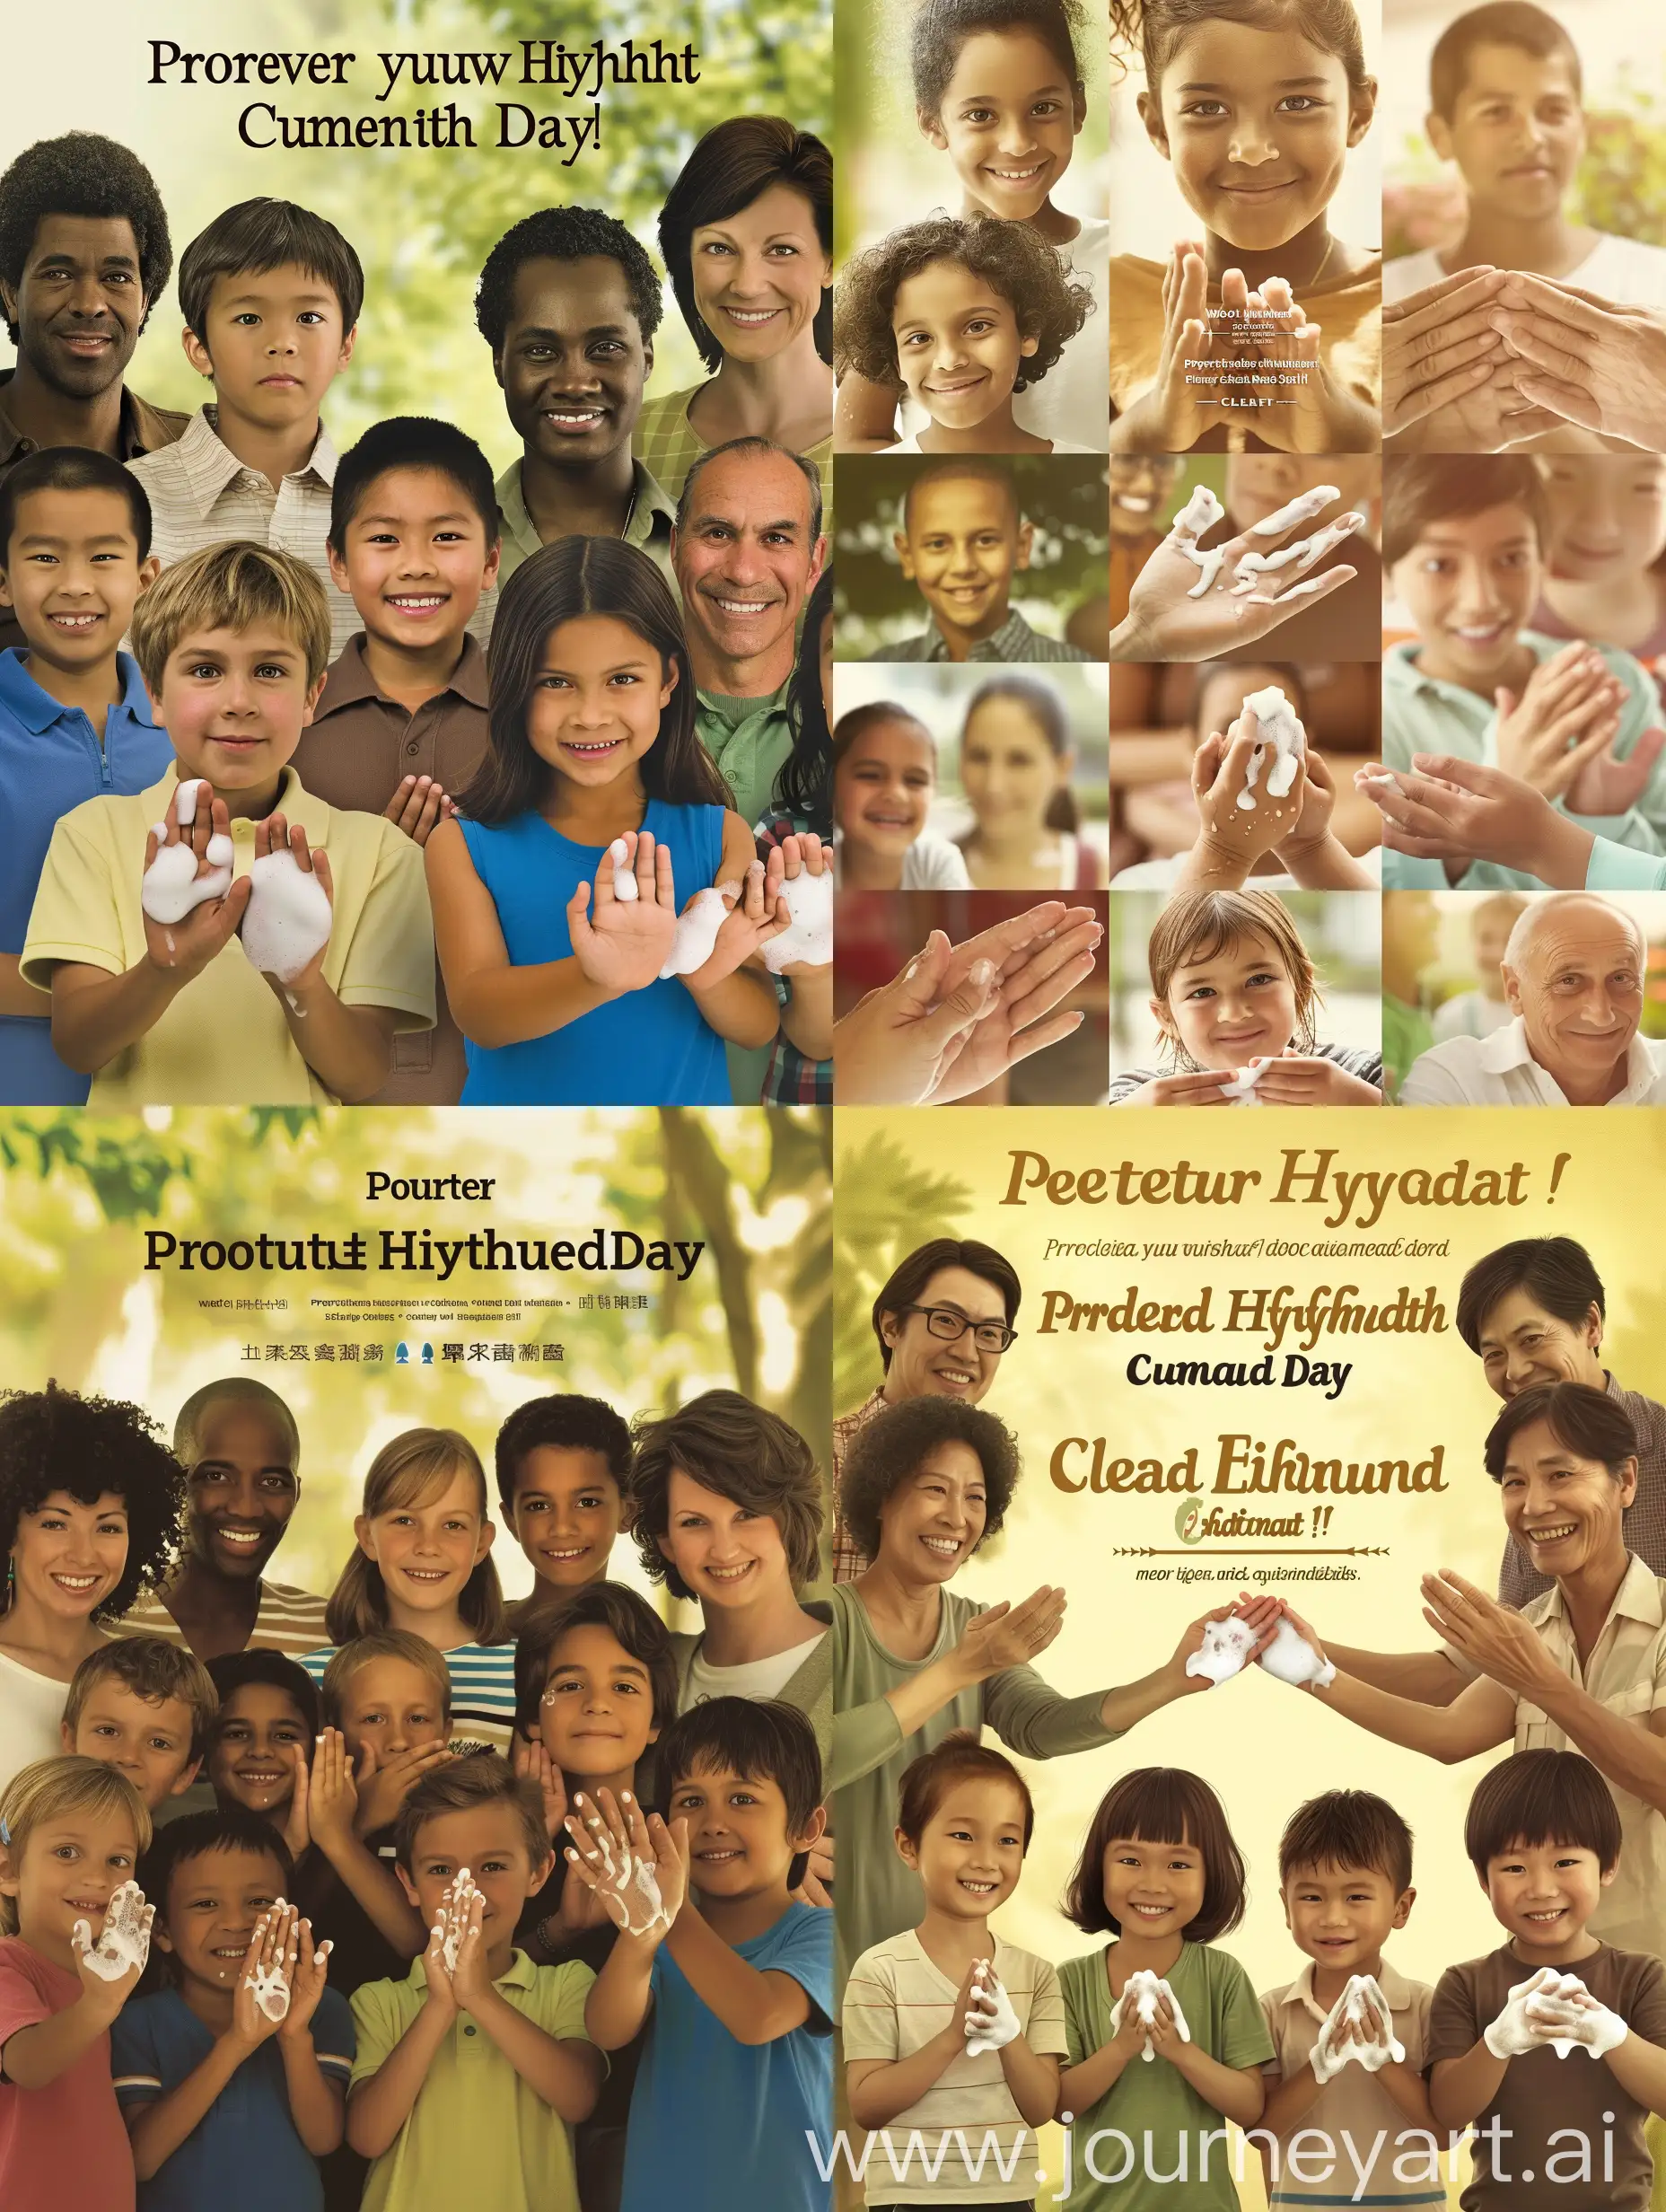 Celebrating-World-Hand-Hygiene-Day-Diverse-Population-with-Clean-Hands-Poster